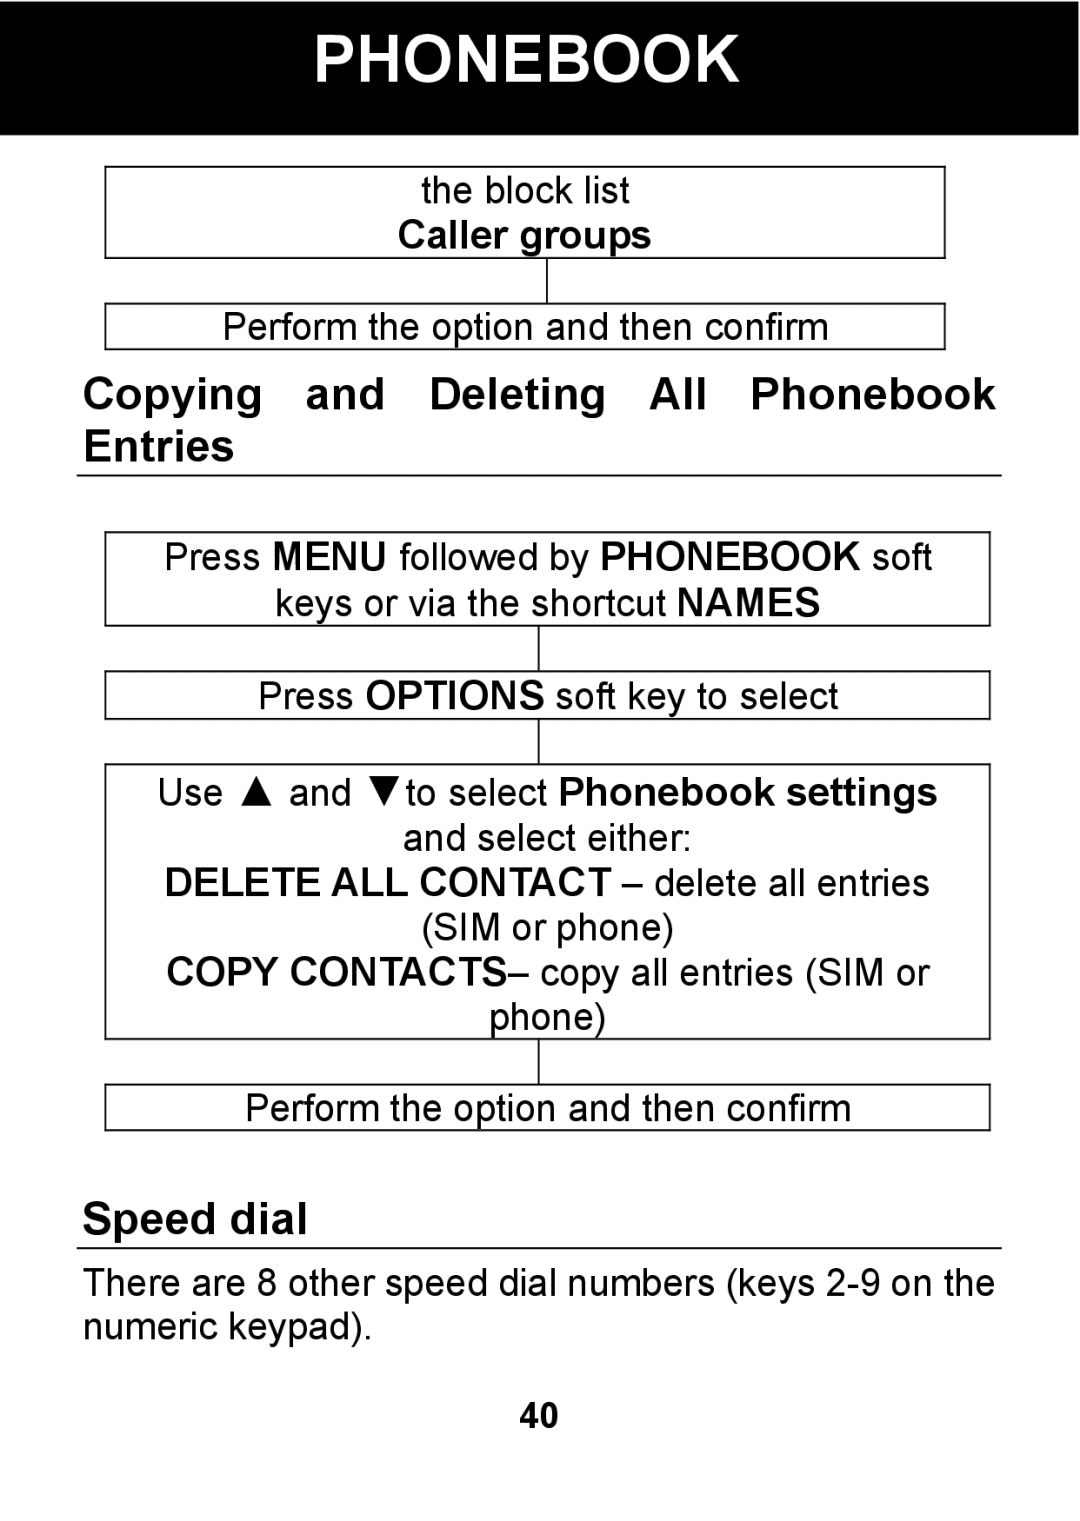 Pal/Pax PAL101 manual Copying and Deleting All Phonebook Entries, Speed dial, Caller groups 